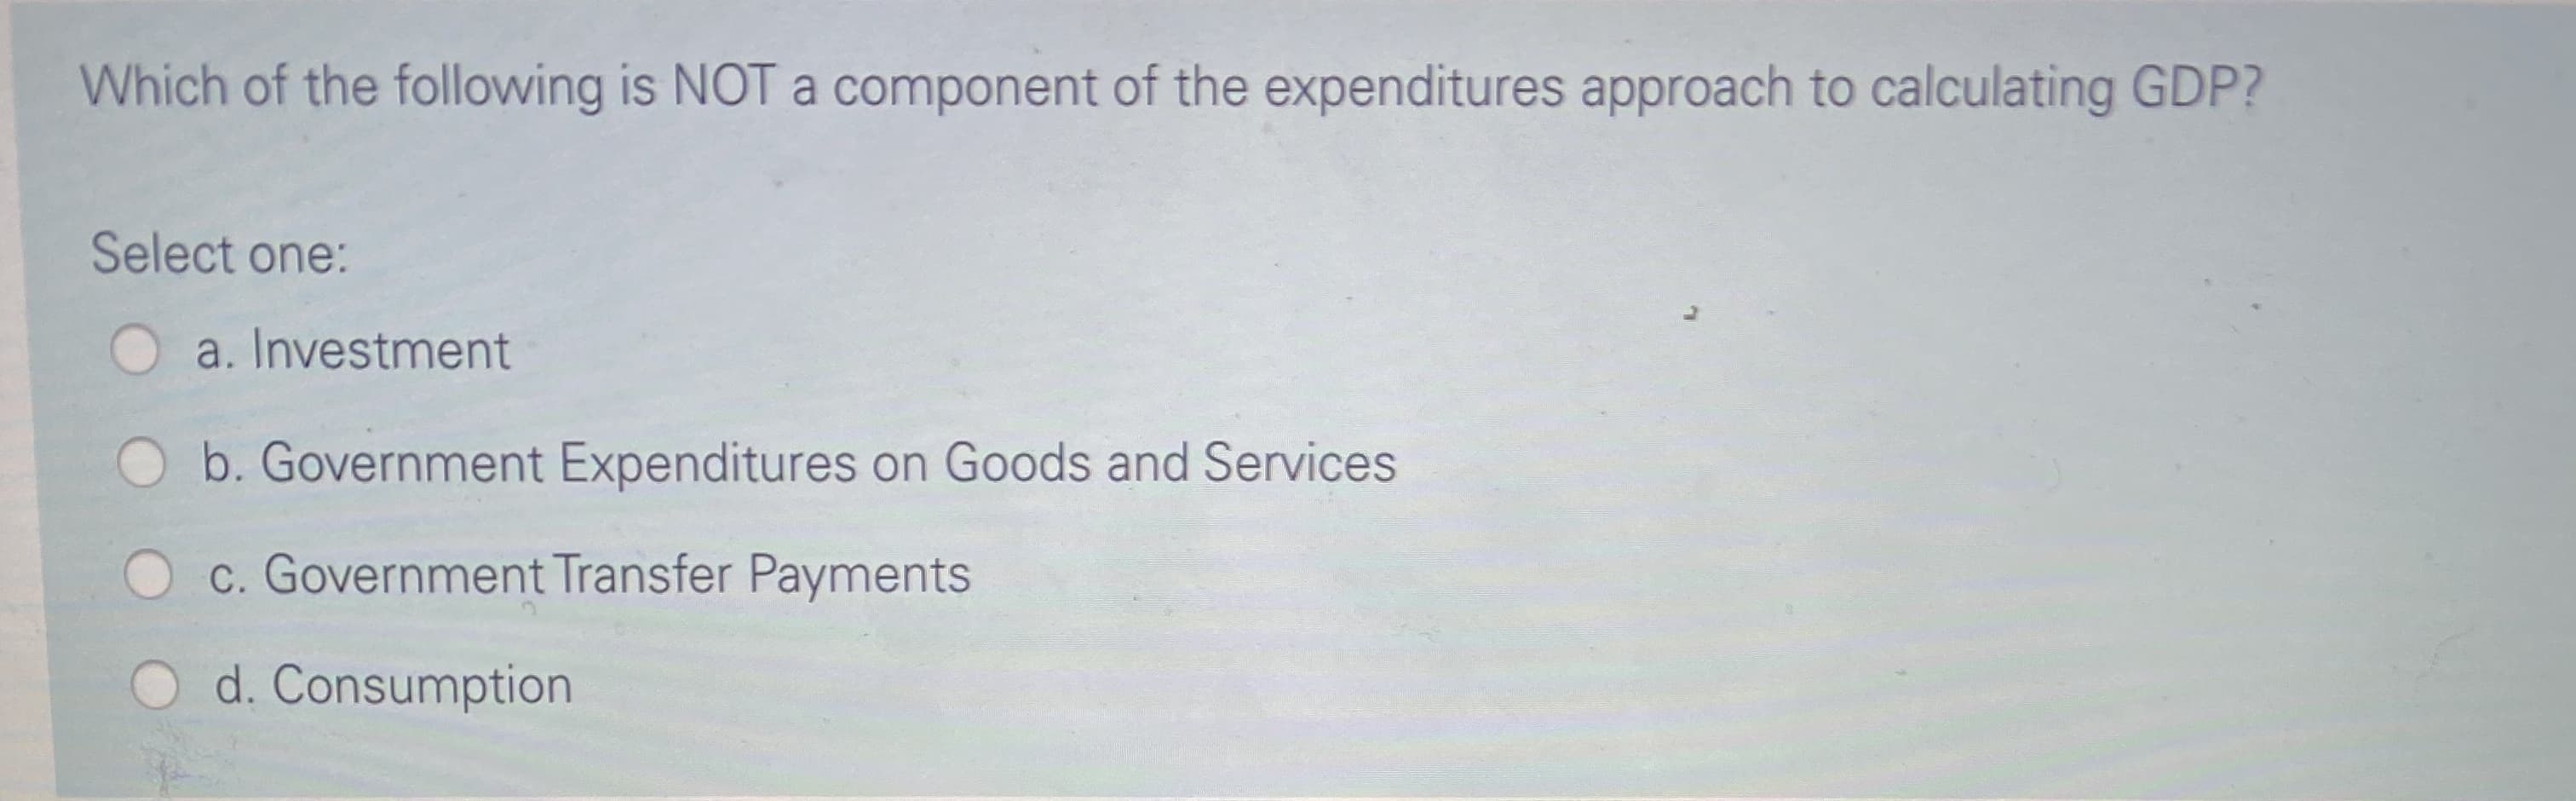 Which of the following is NOT a component of the expenditures approach to calculating GDP?
Select one:
a. Investment
b. Government Expenditures on Goods and Services
c. Government Transfer Payments
d. Consumption
